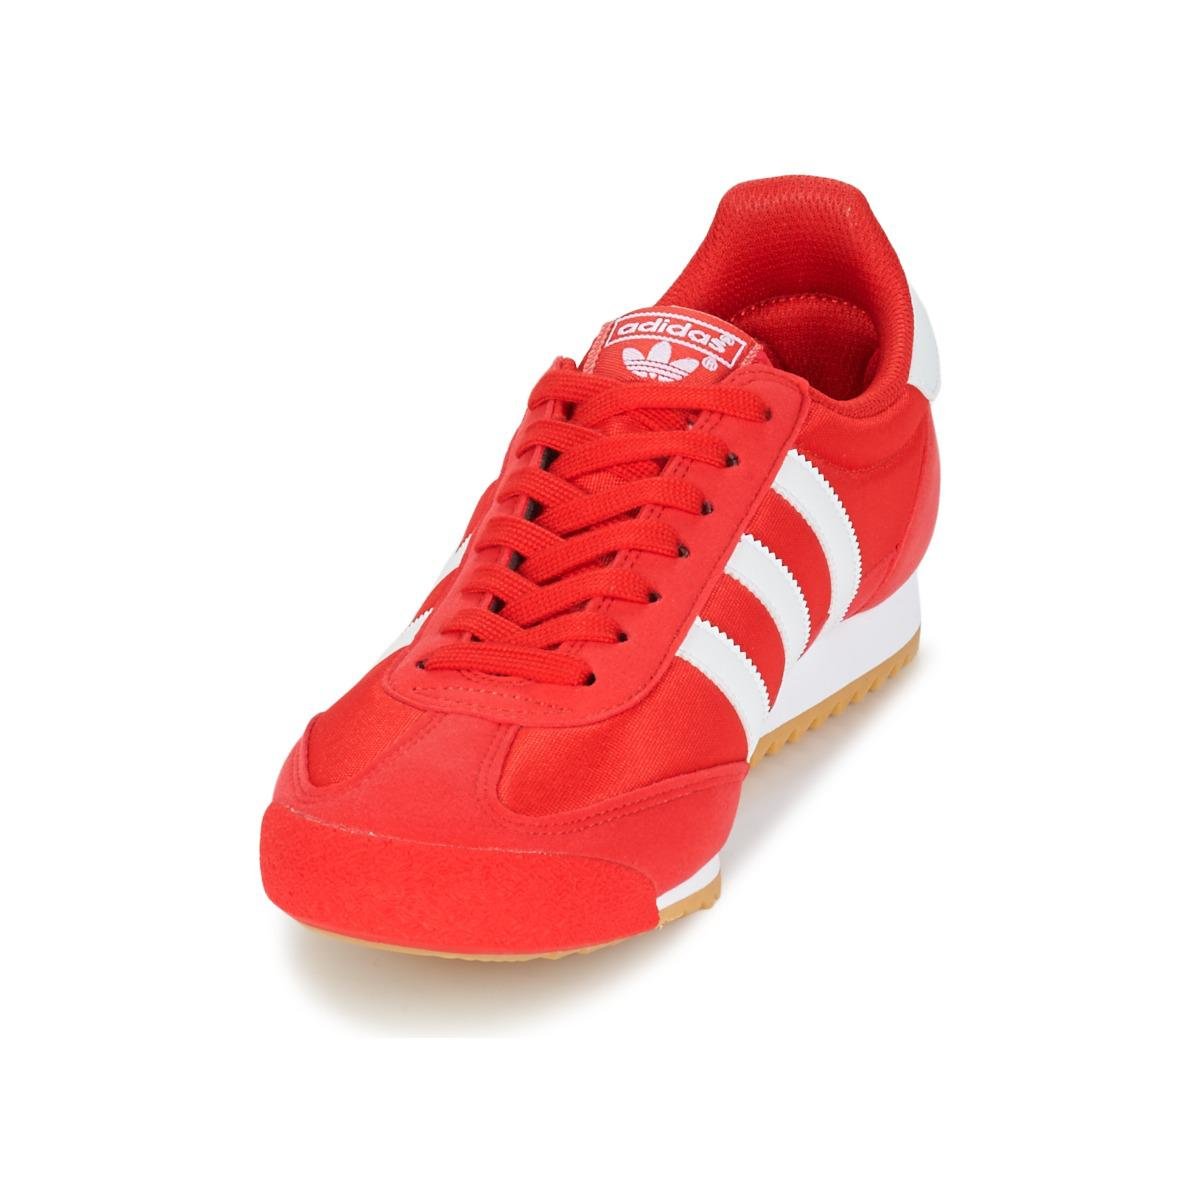 men's adidas red dragon trainers